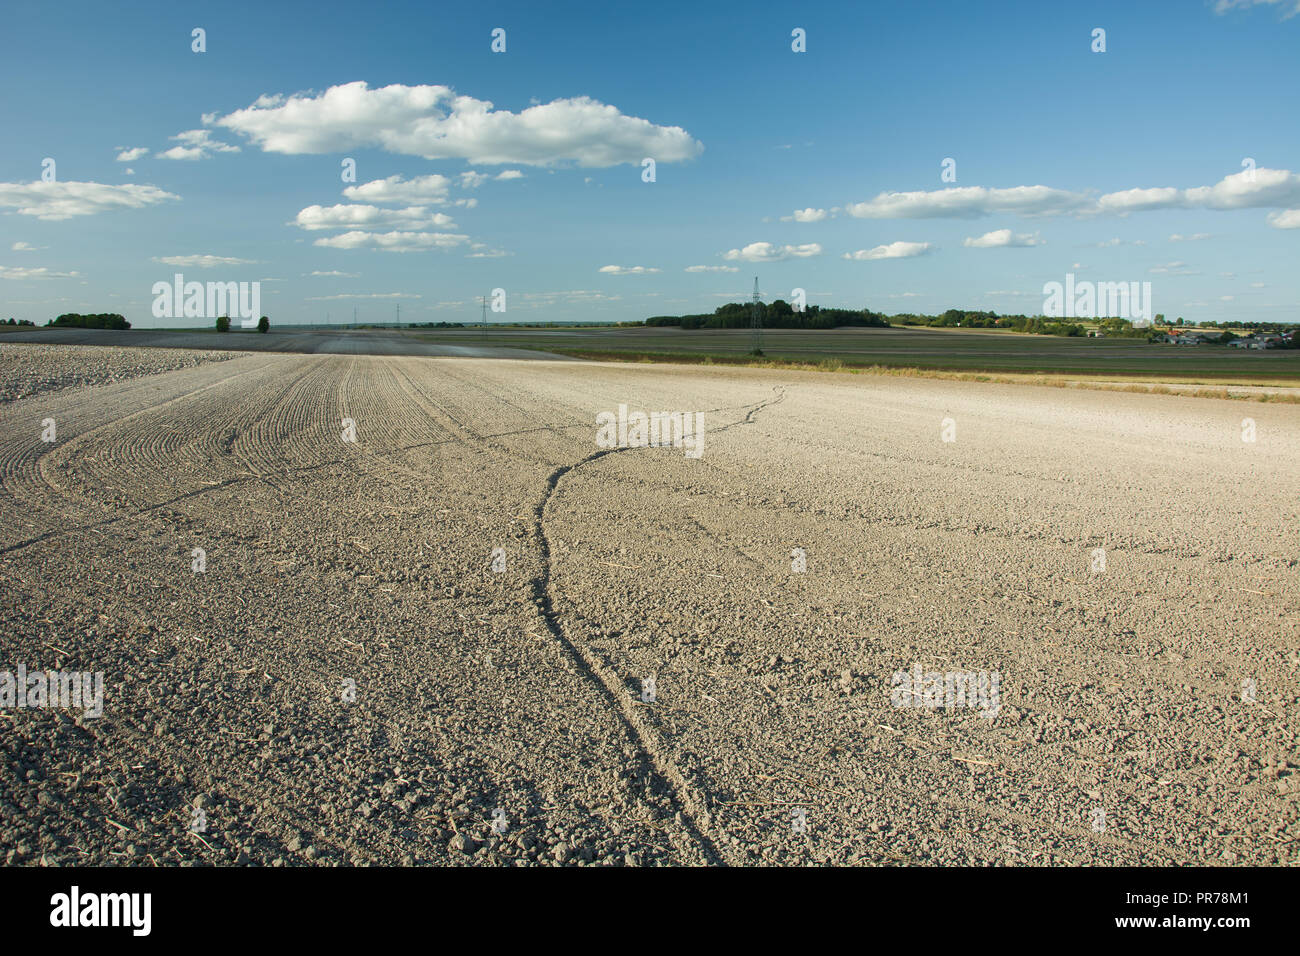 Traces of animals on a plowed field, horizon and blue sky Stock Photo